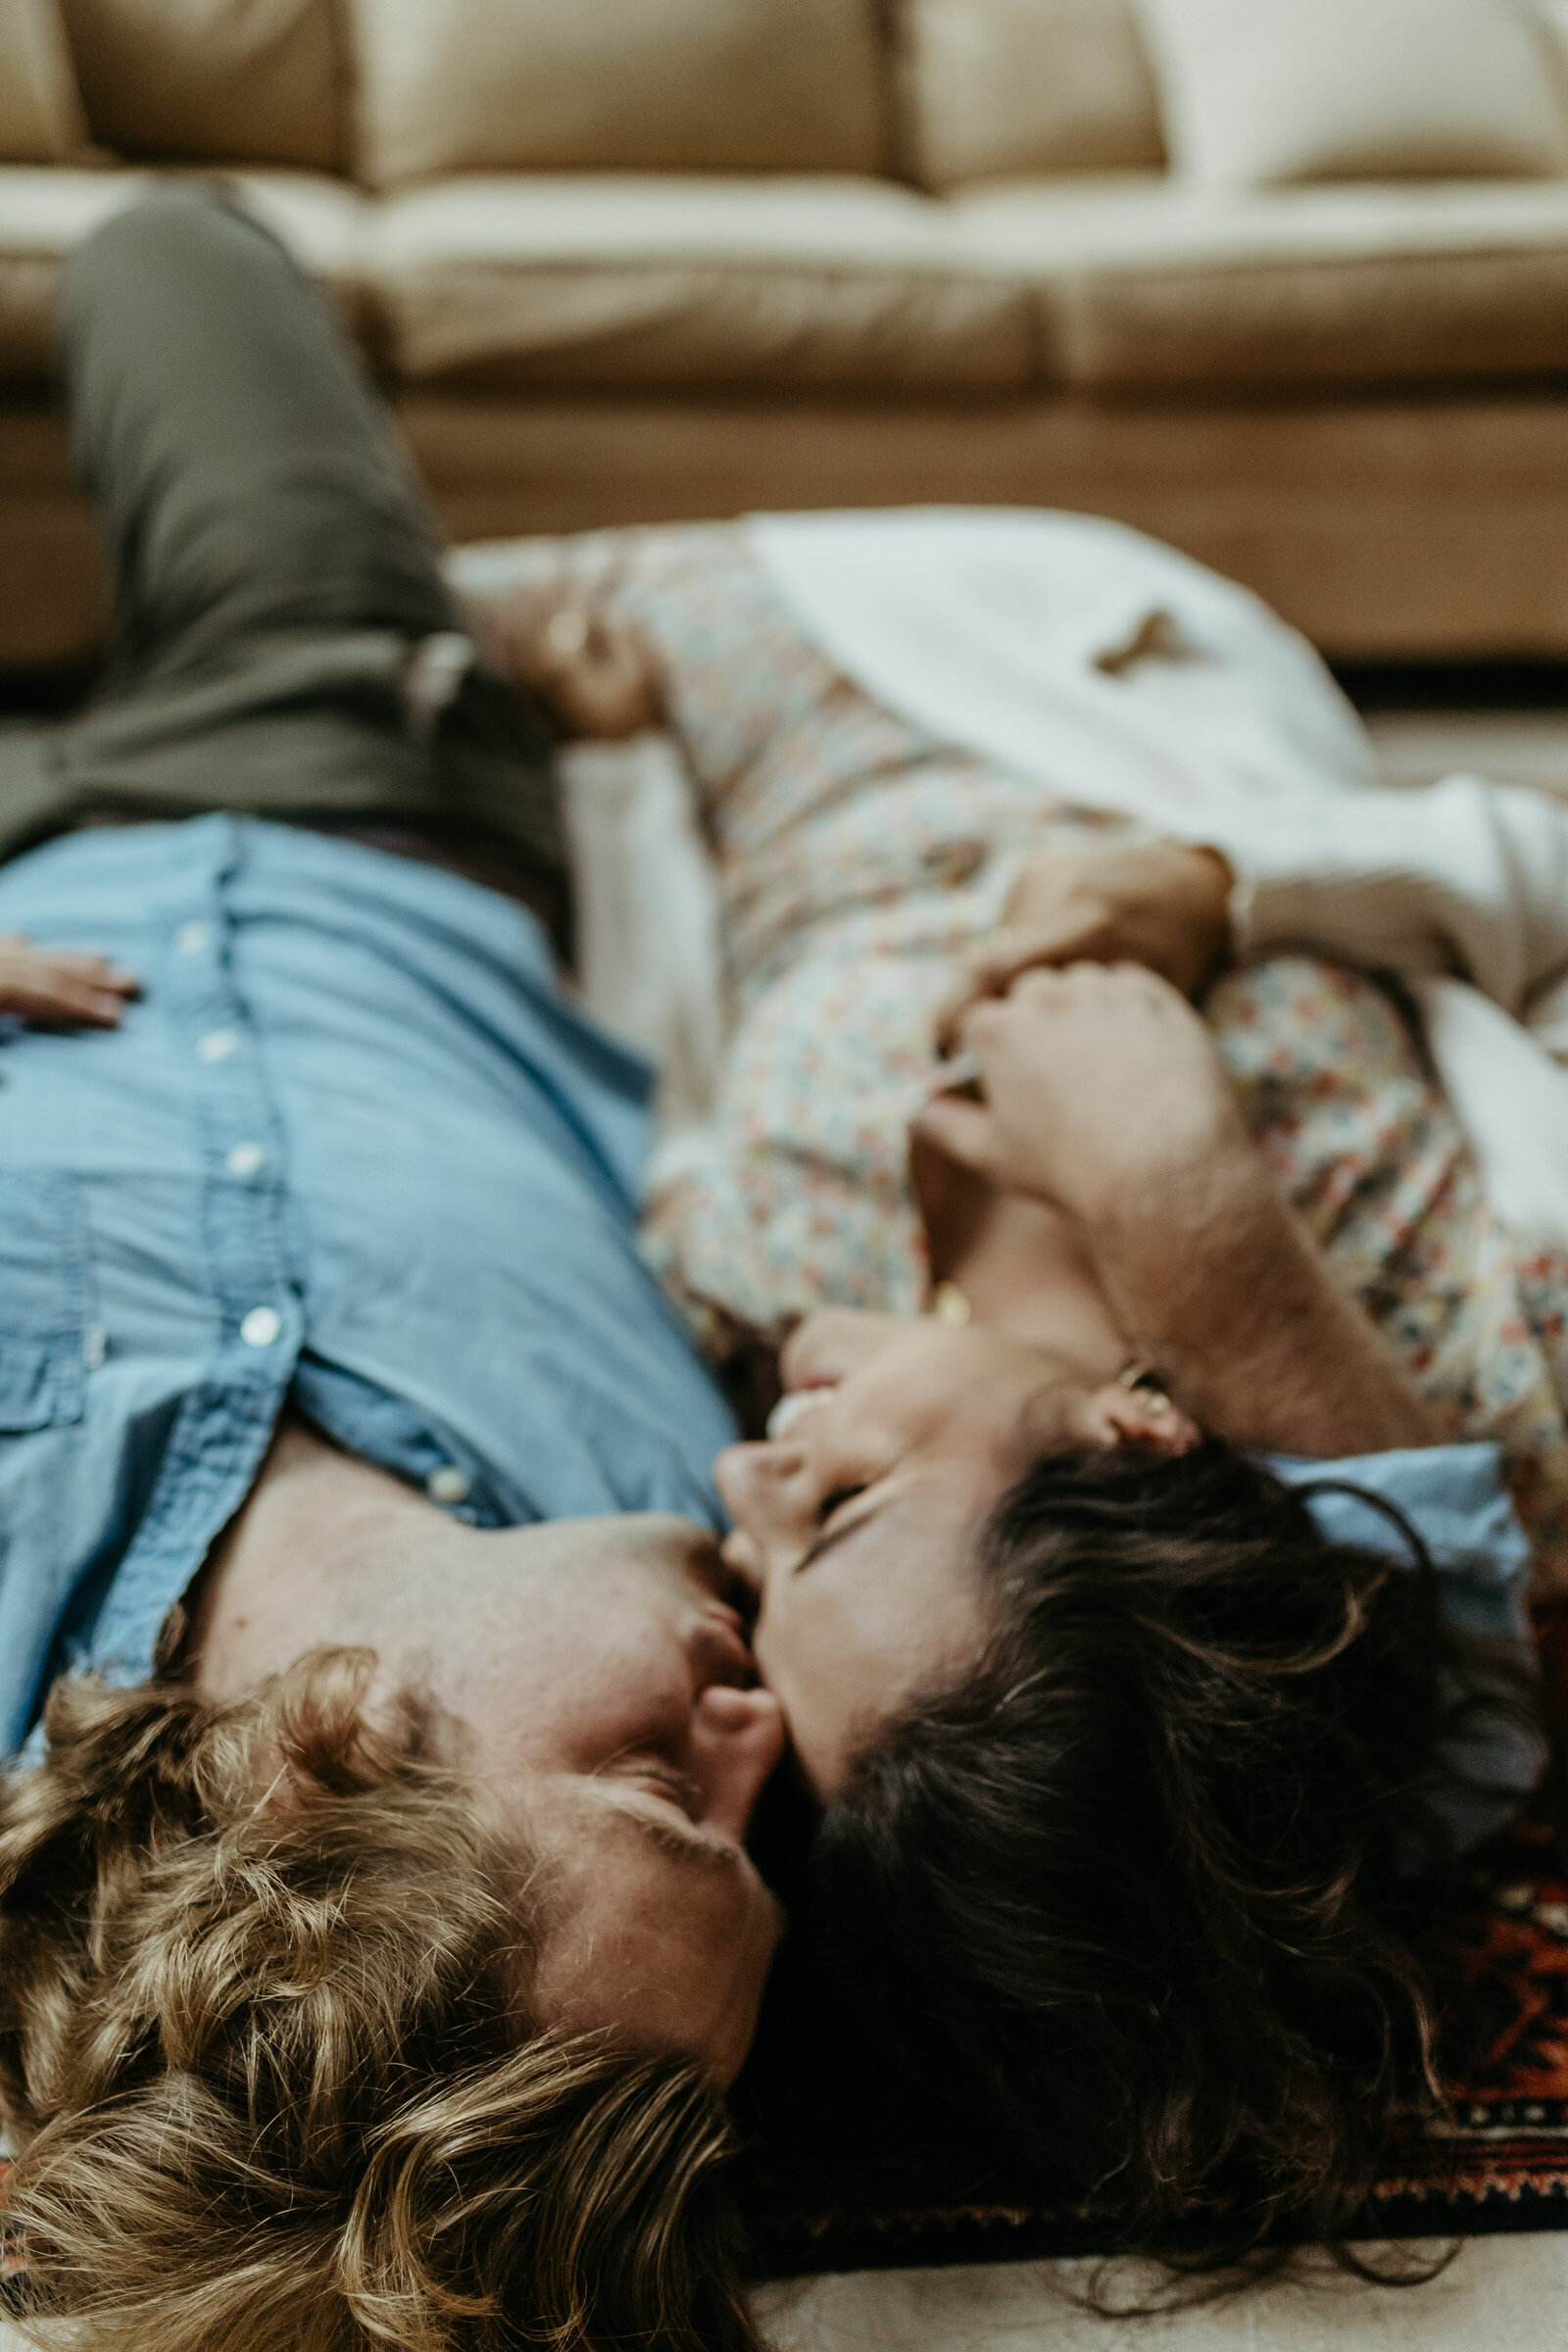 Man and woman lie on the floor and he kisses her forehead